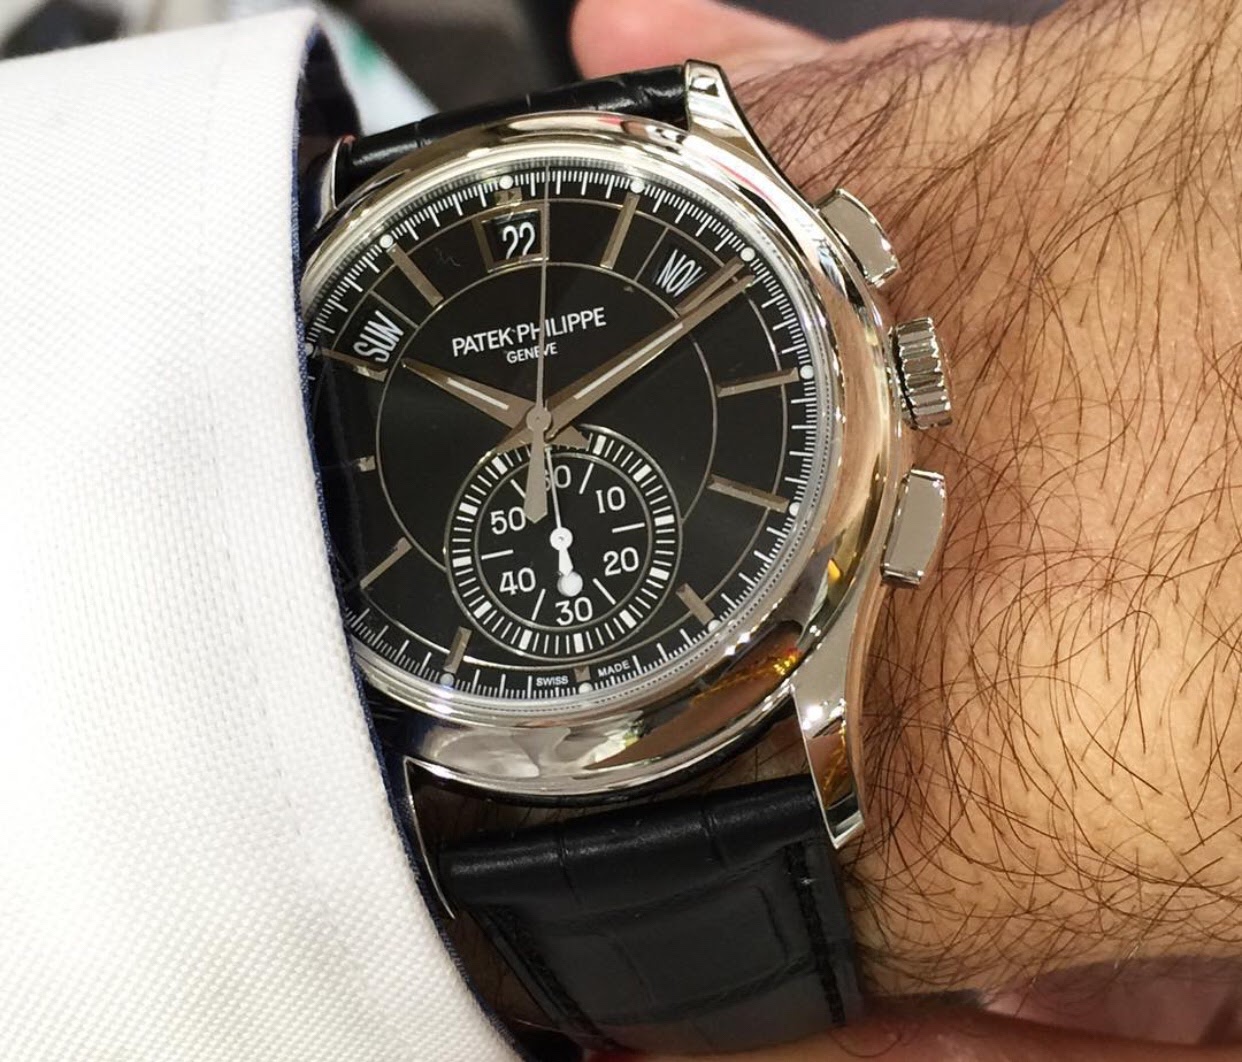 Patek Philippe - Is it too redundant to own both a 5905P and 5960A?